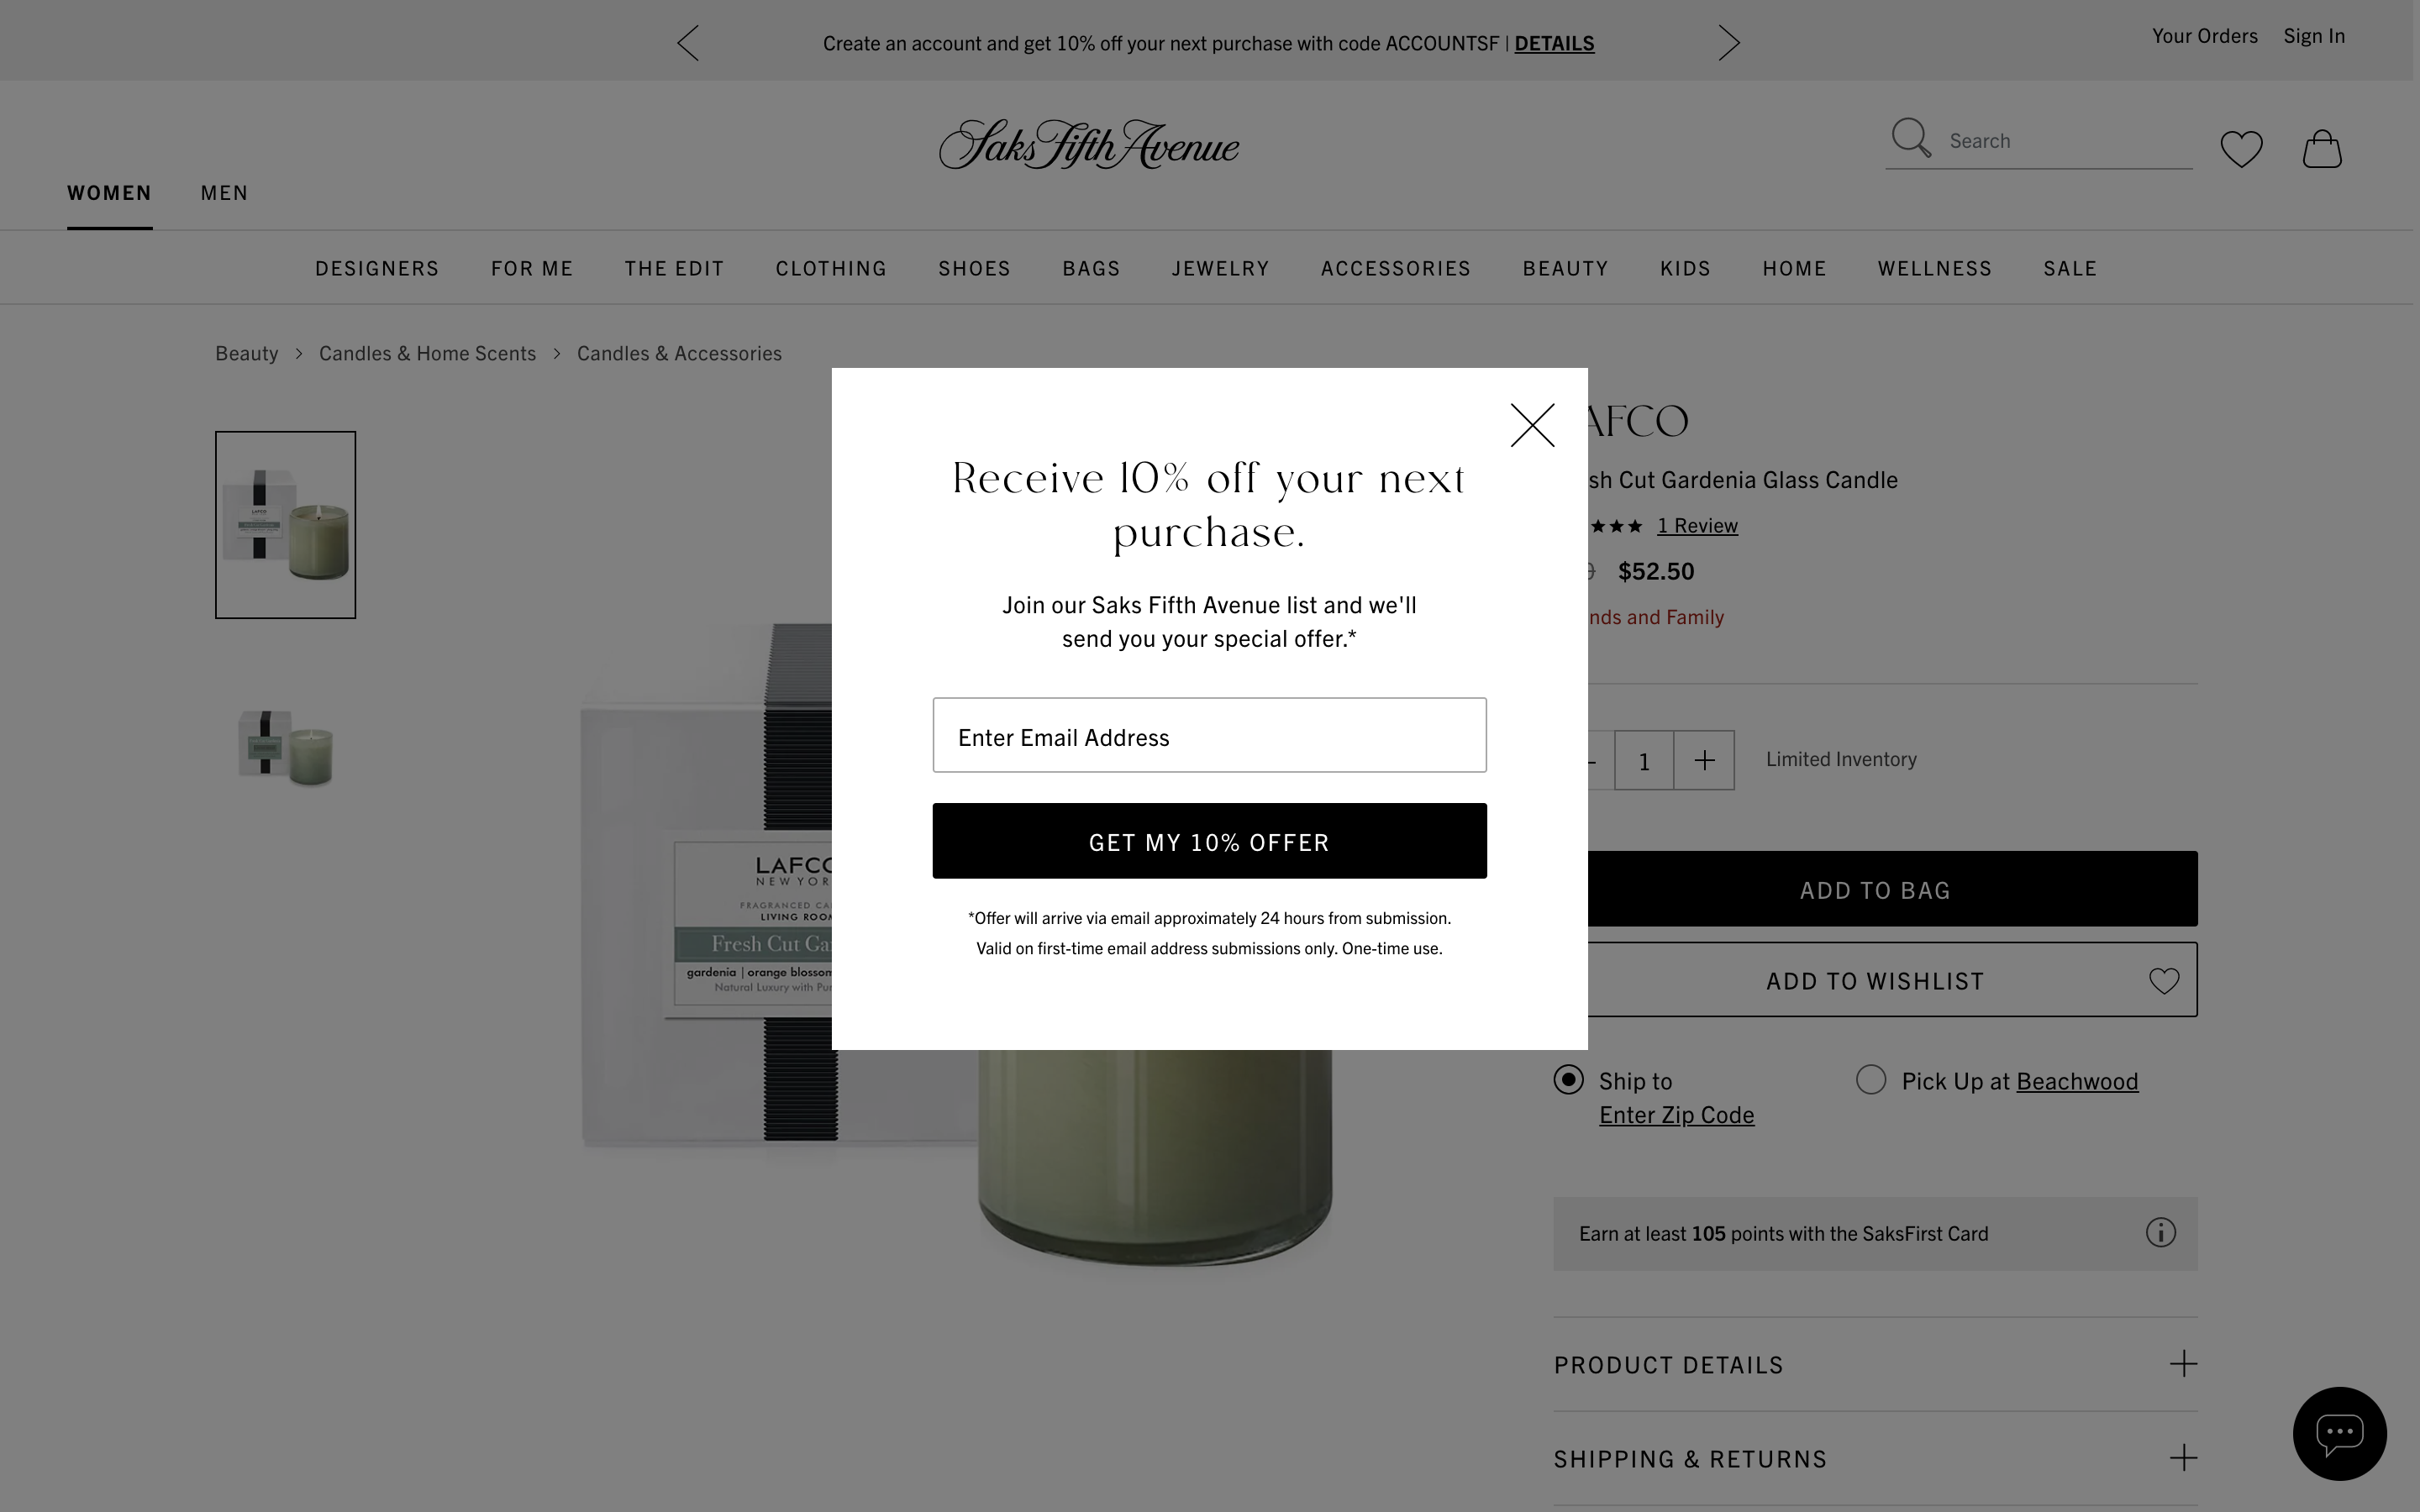 Discount email coupon example from Saks Fifth Avenue